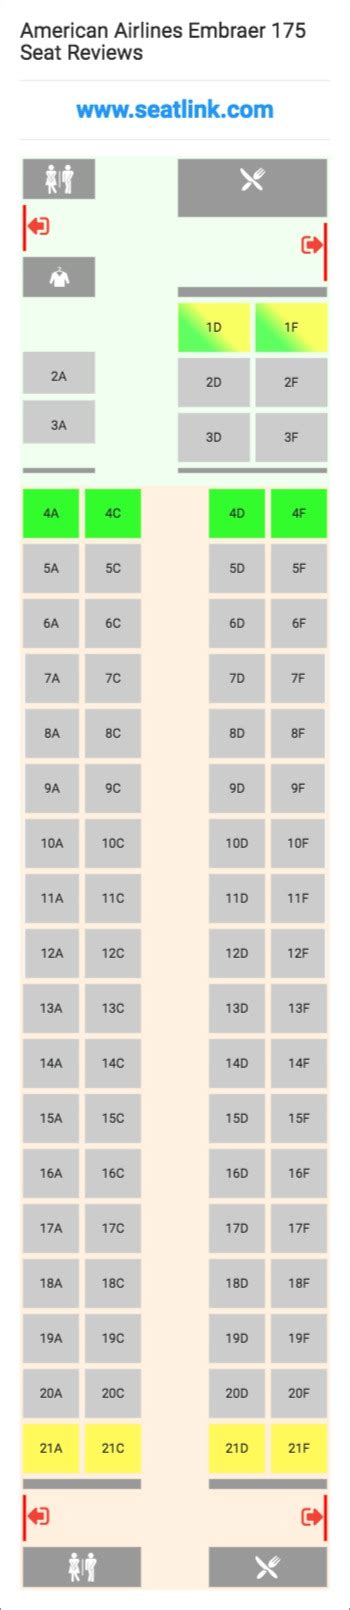 embraer 175 american airlines seats